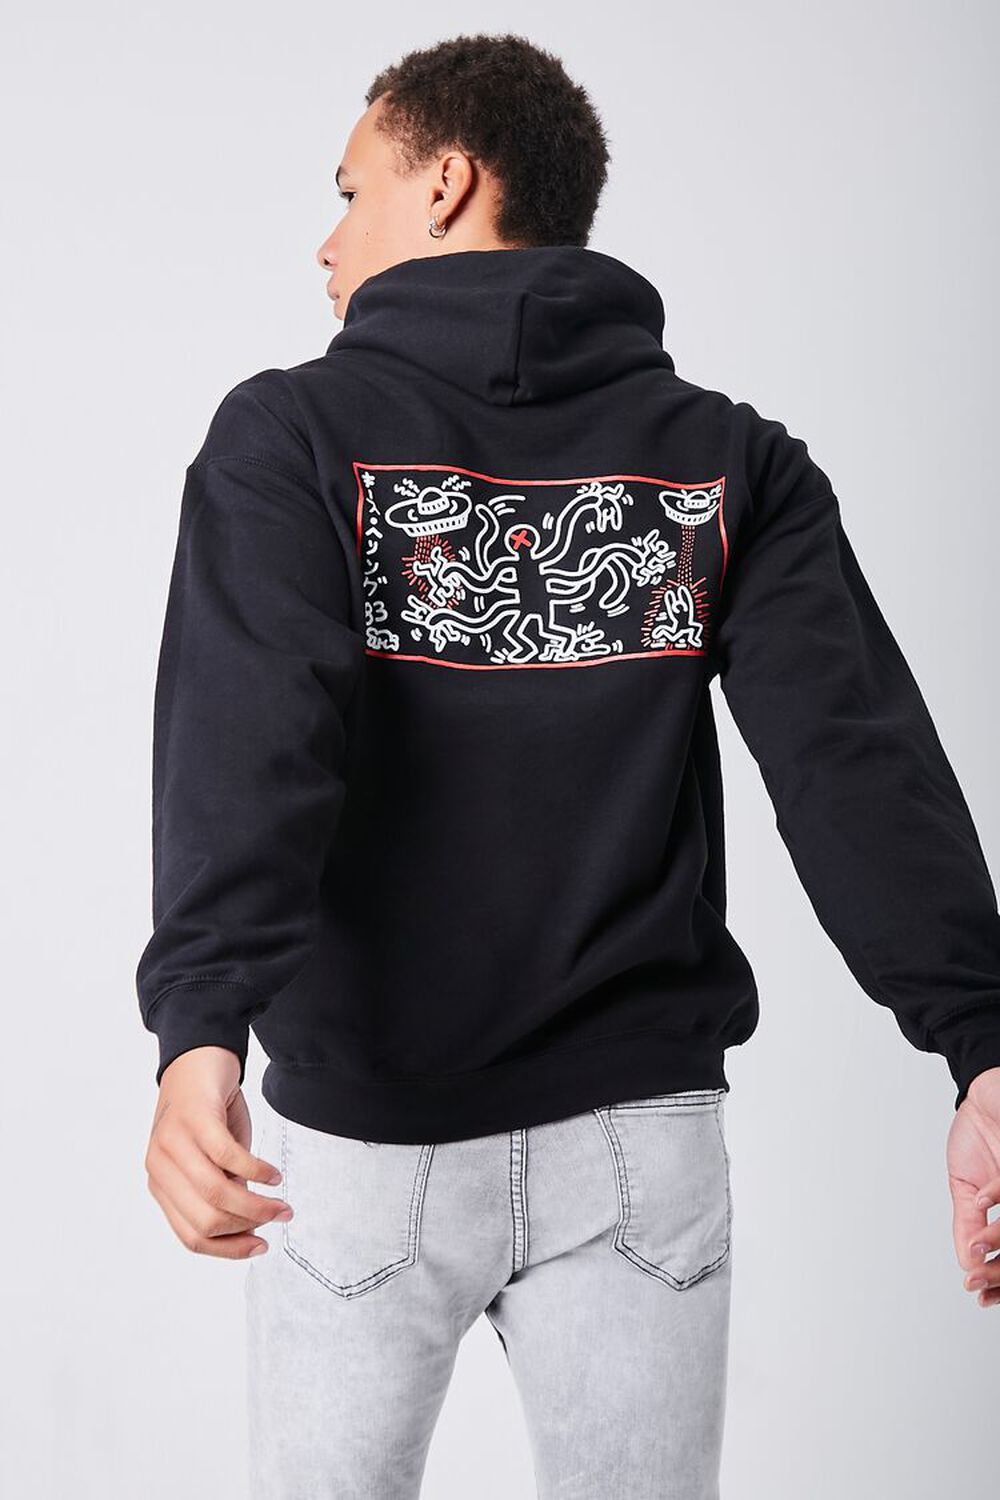 BLACK/RED Keith Haring Graphic Hoodie, image 3